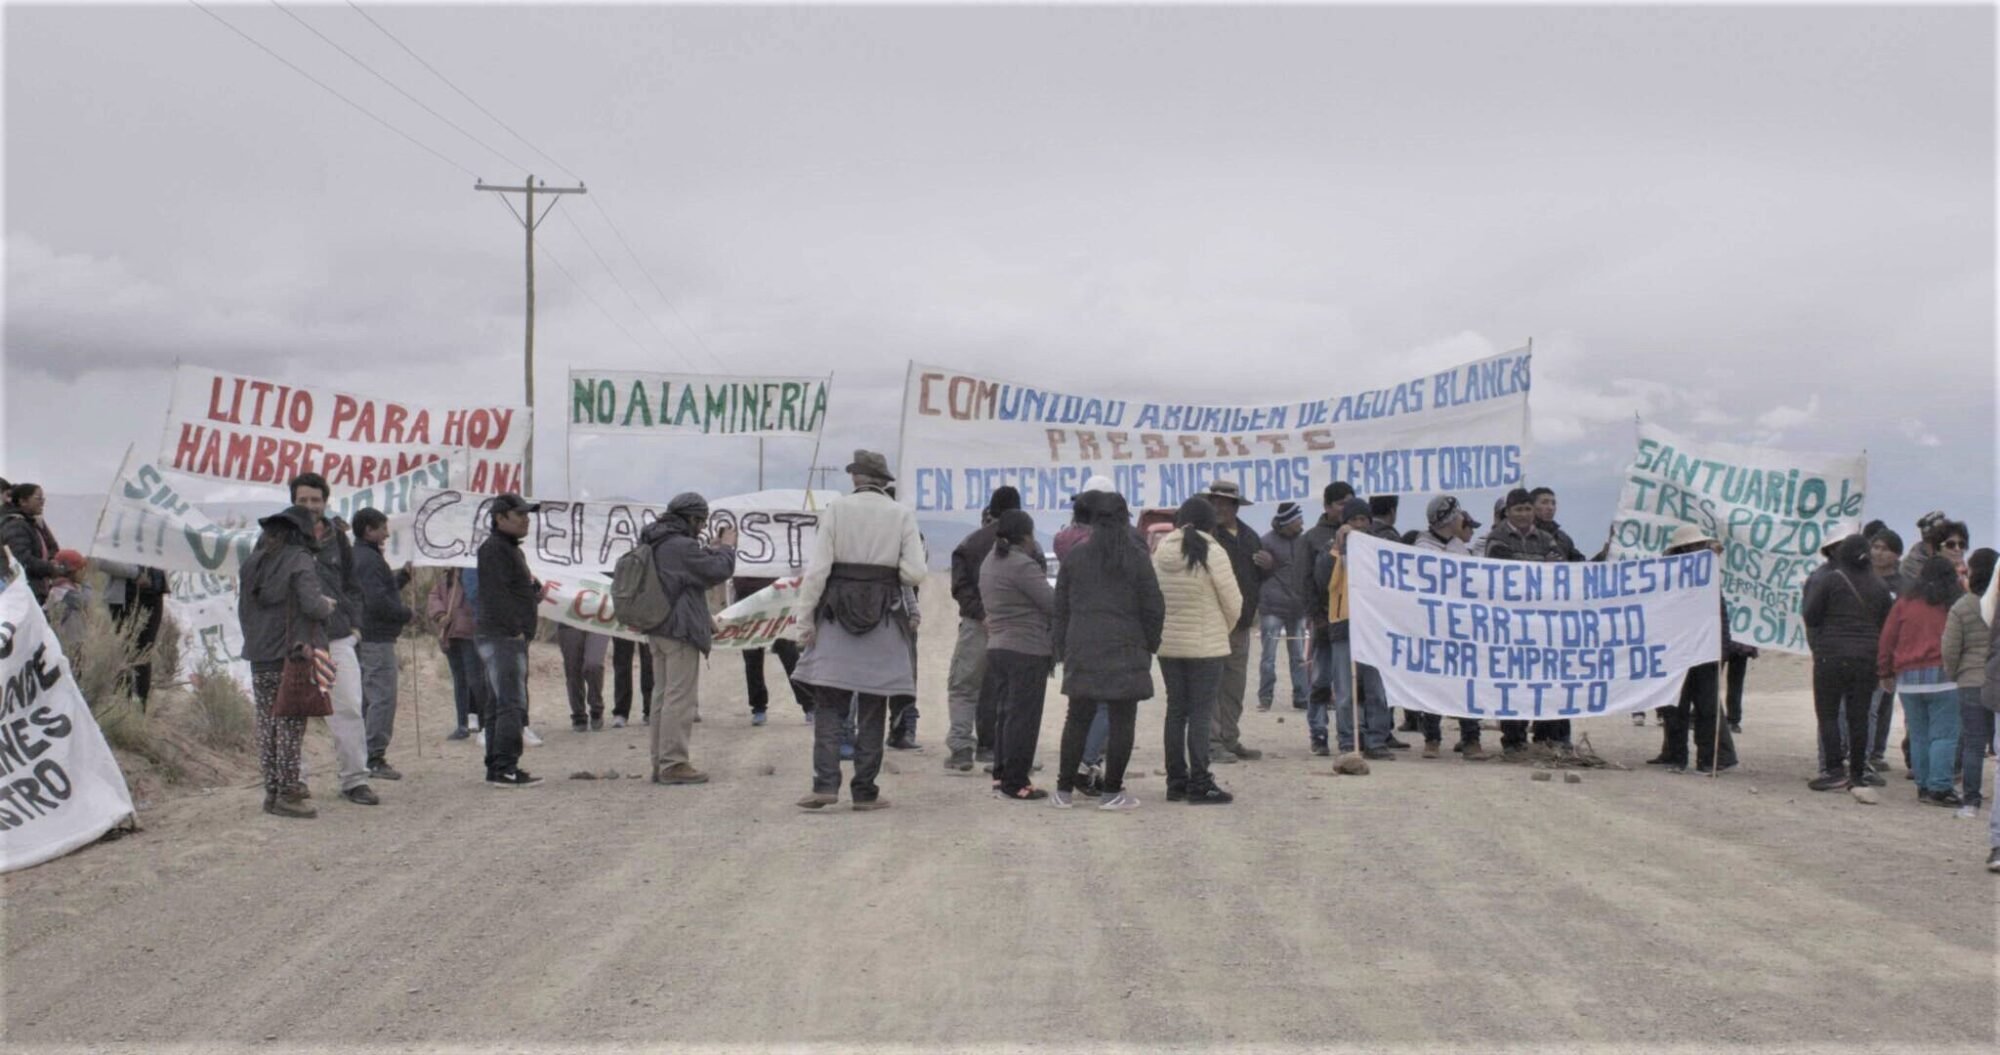 A protest by the communities of Salinas Grandes, Jujuy (image credit: FARN)